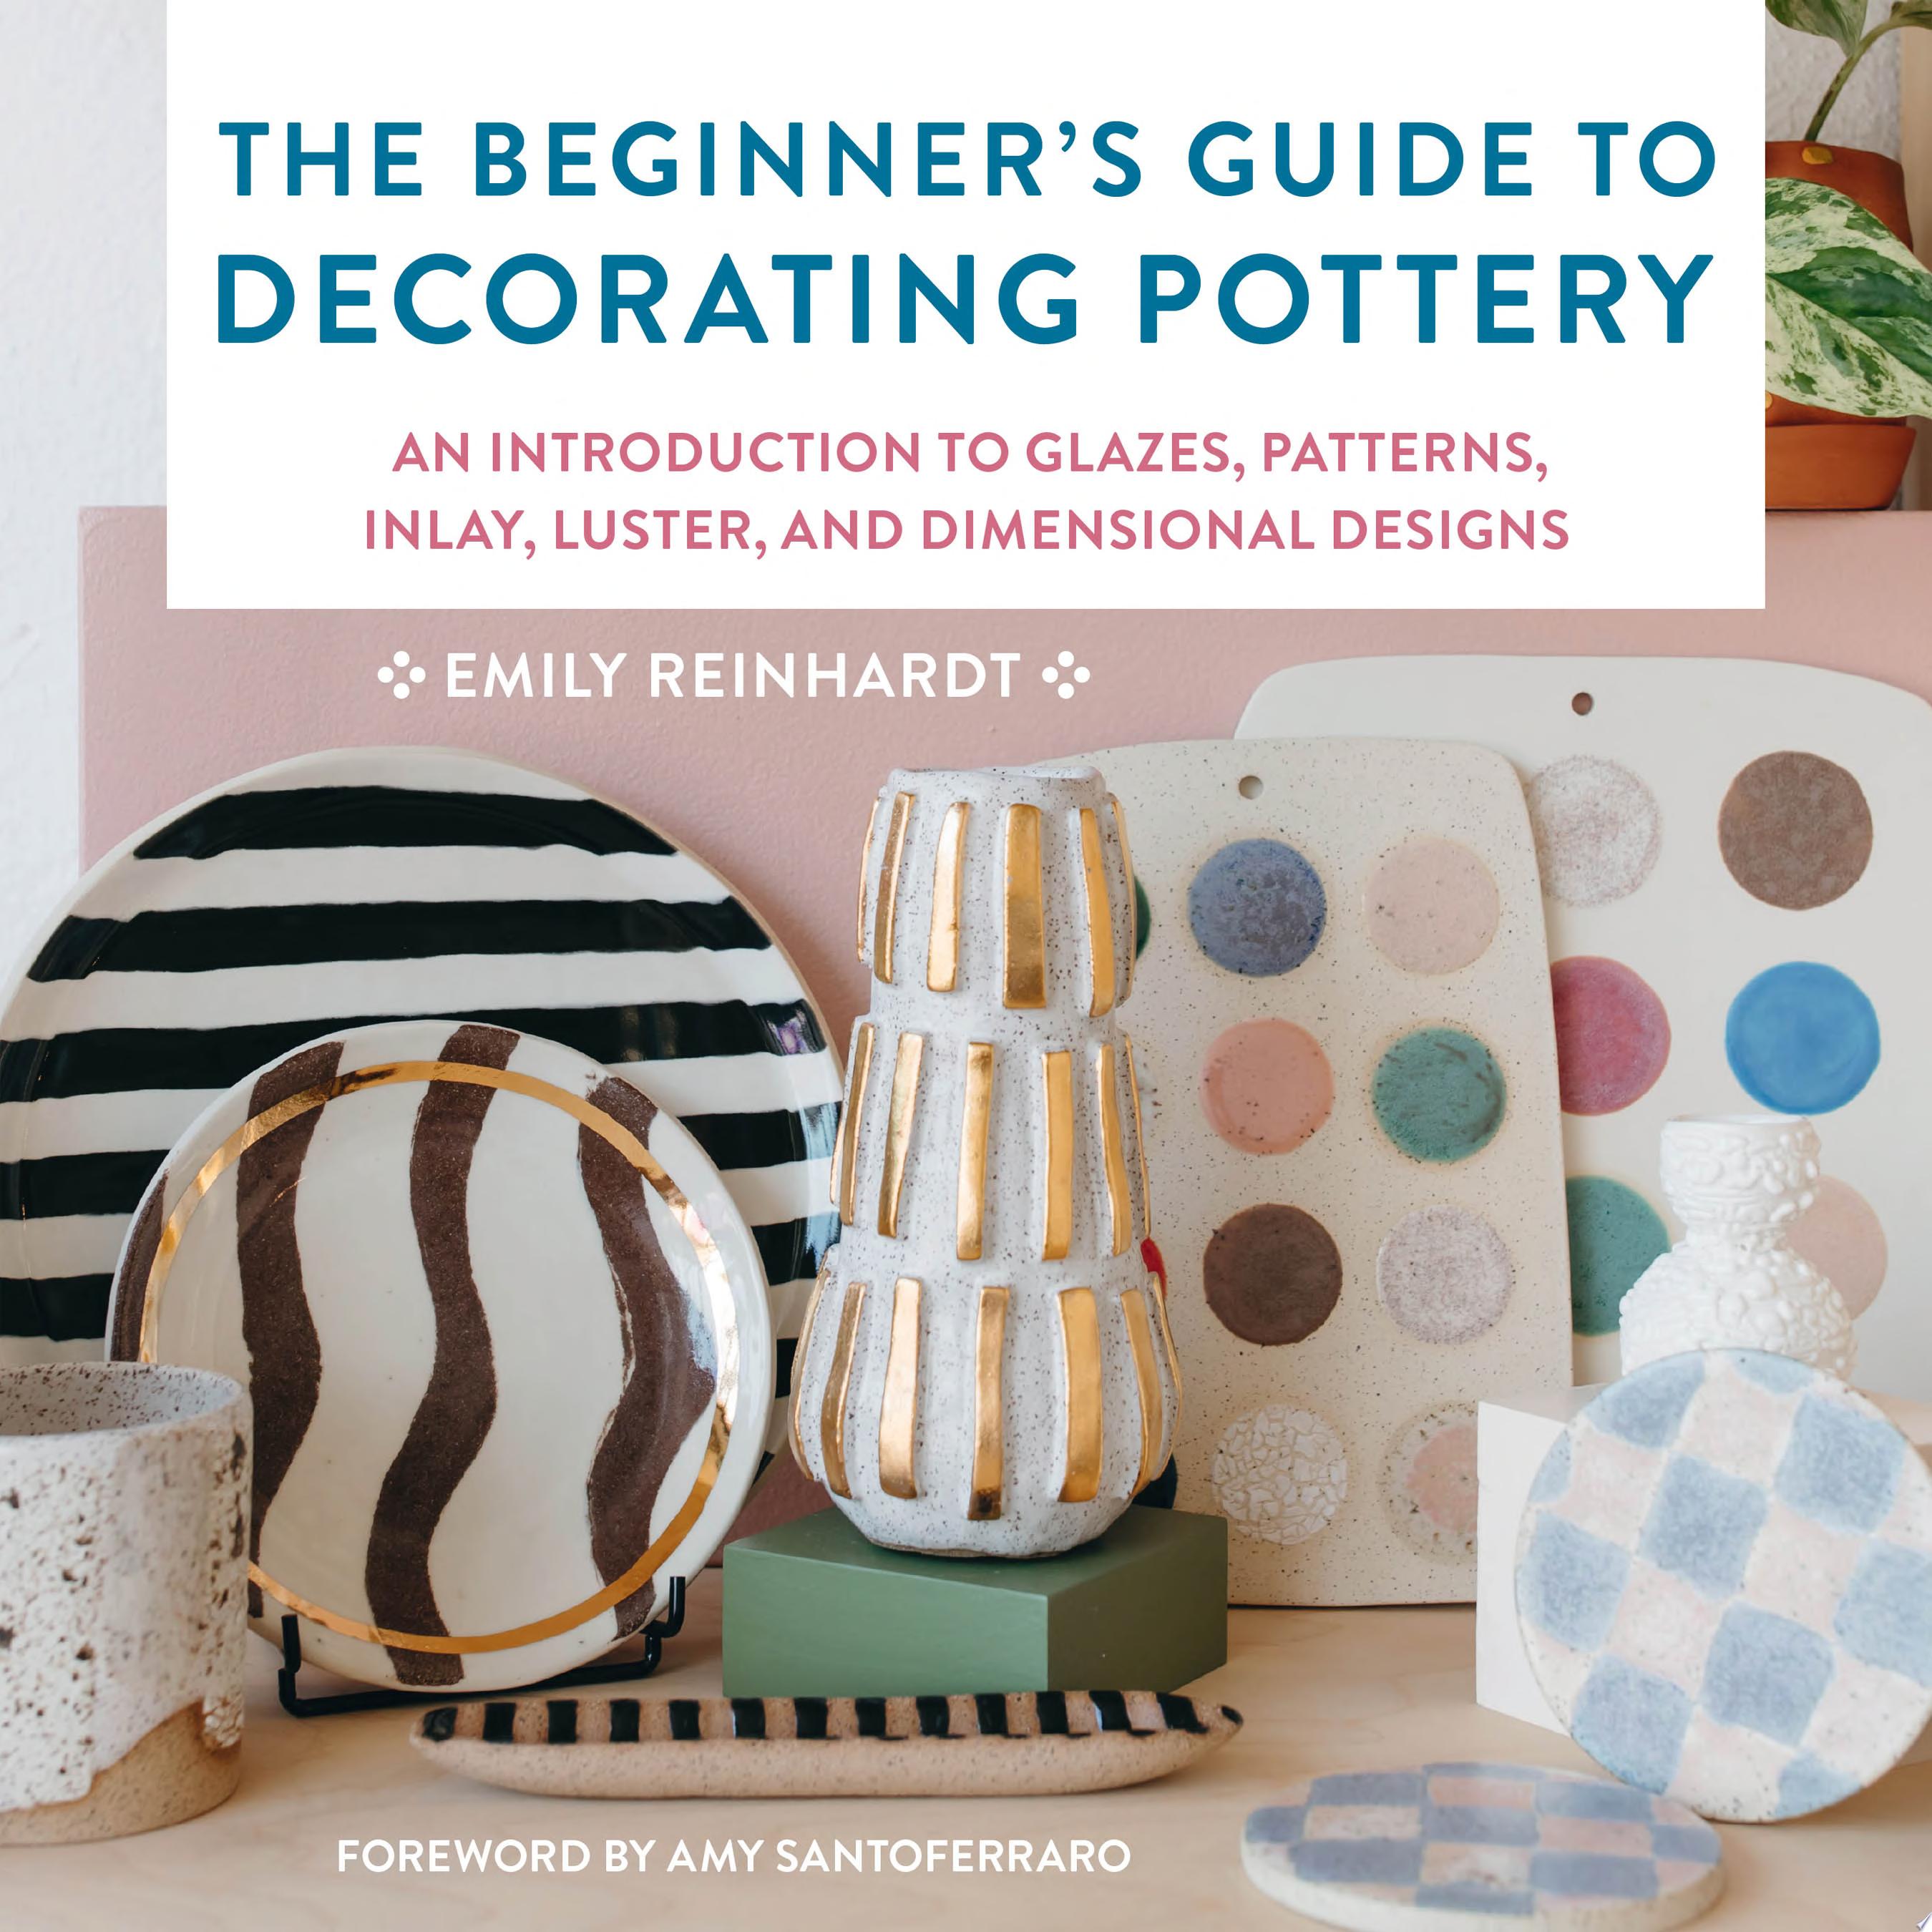 Image for "The Beginner&#039;s Guide to Decorating Pottery"